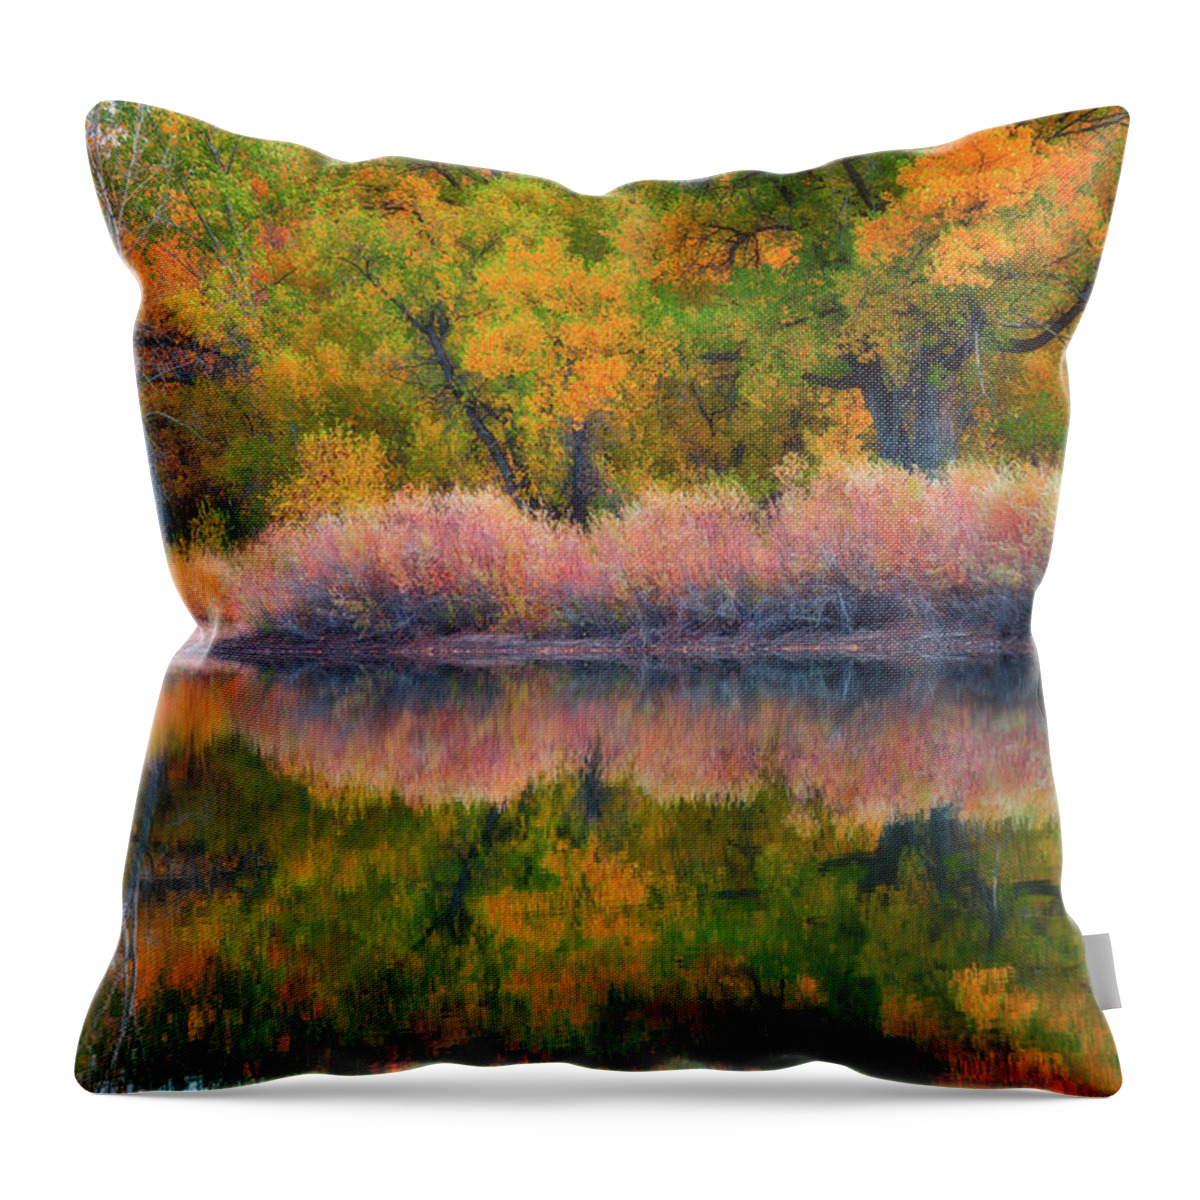 Fall Colors Throw Pillow featuring the photograph Autumn's Color Palette by Darren White